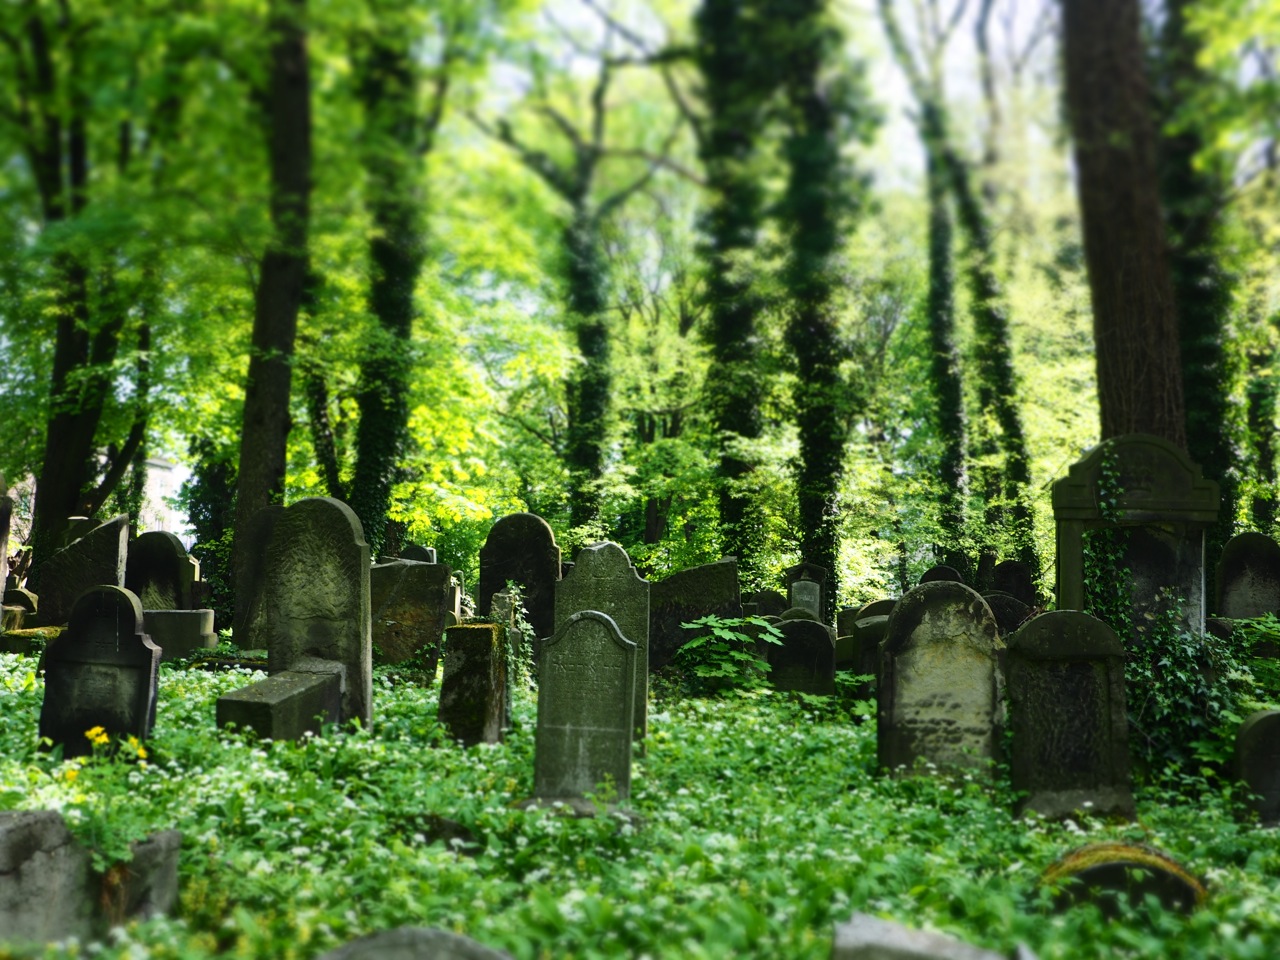 "The new Jewish Cemetery", Cmentarz Zydowski, established in 1800 and destroyed in WWII. It was 'tidied' up in 1957 and is today a monument to Holocaust victims. Image: Alison Binney